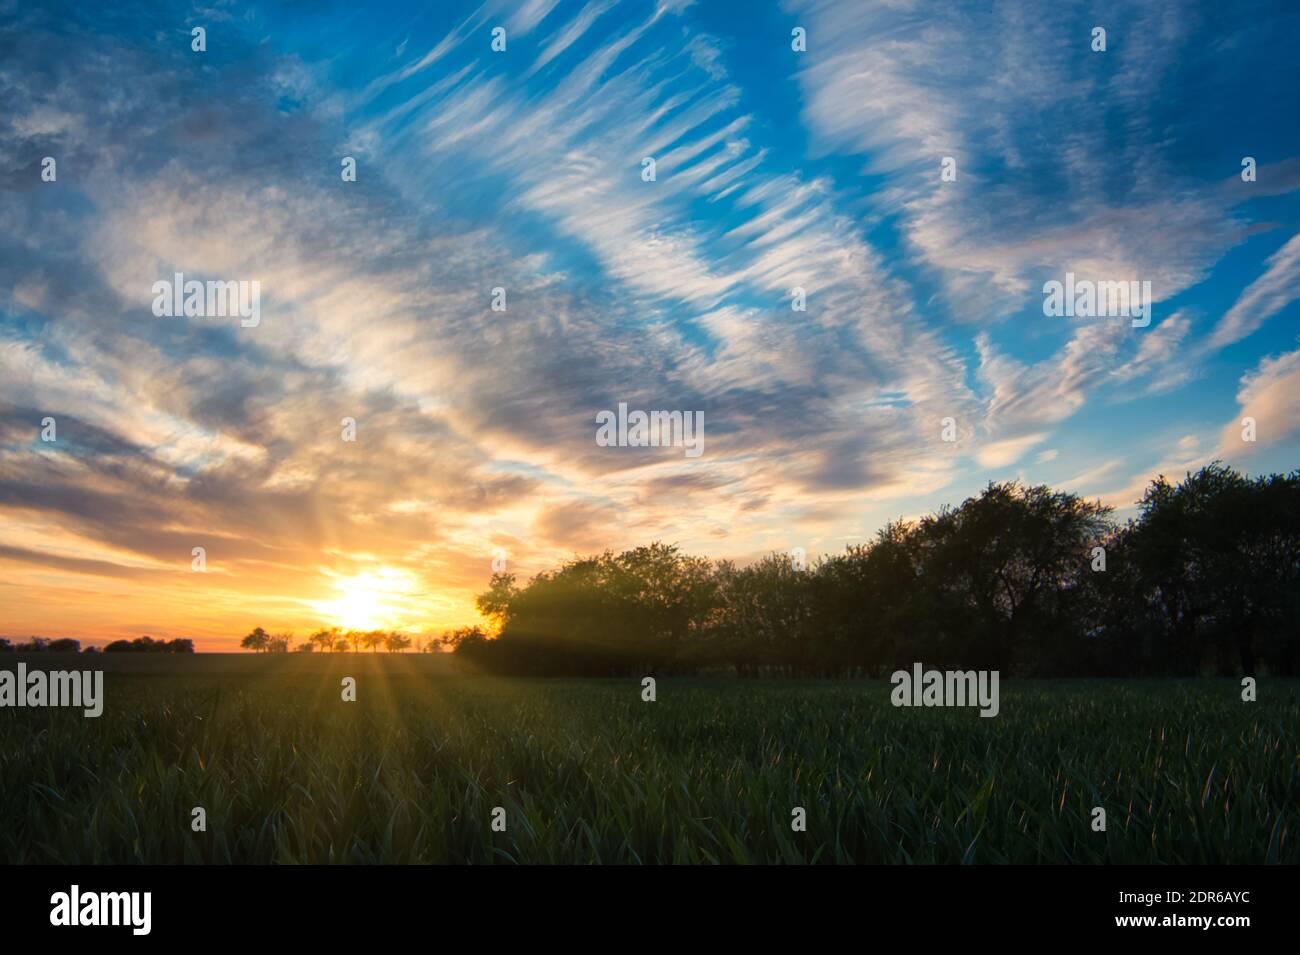 Sunset on a meadow with green grass and silhouettes of trees. The sky is full of colorful clouds. Sunbeams and beautiful spring colors. Stock Photo